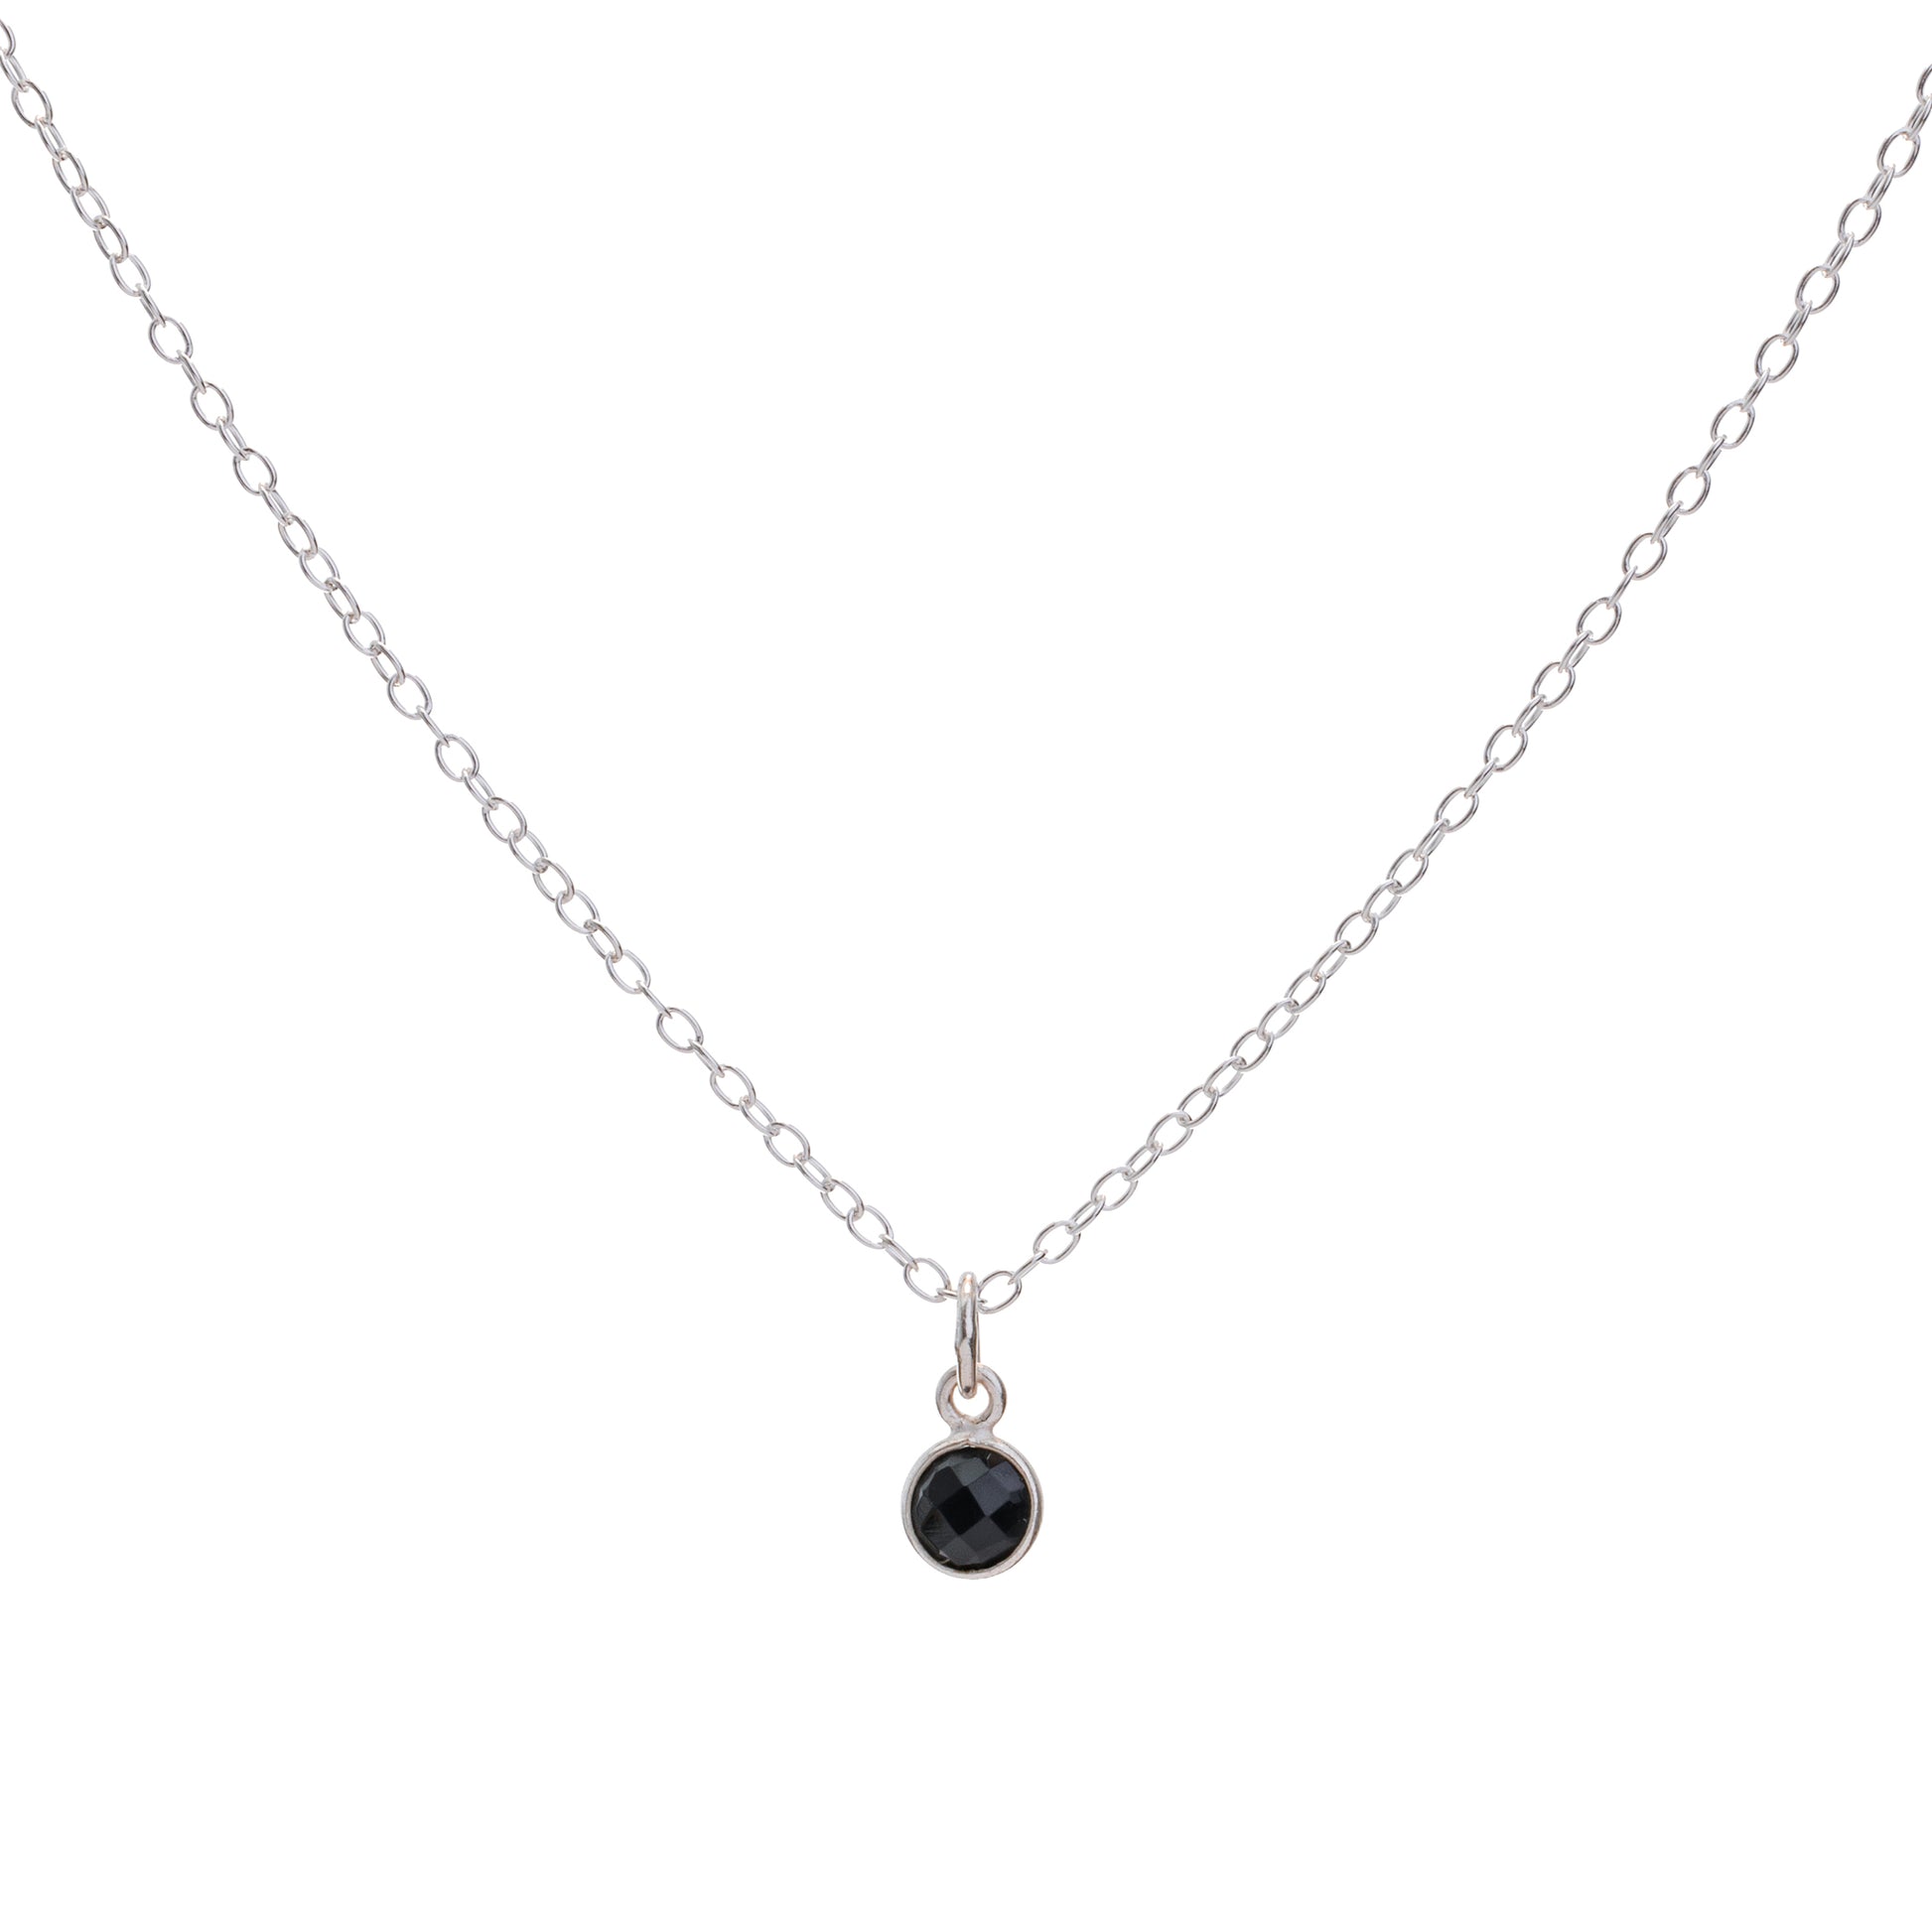 Silver Onyx Necklace